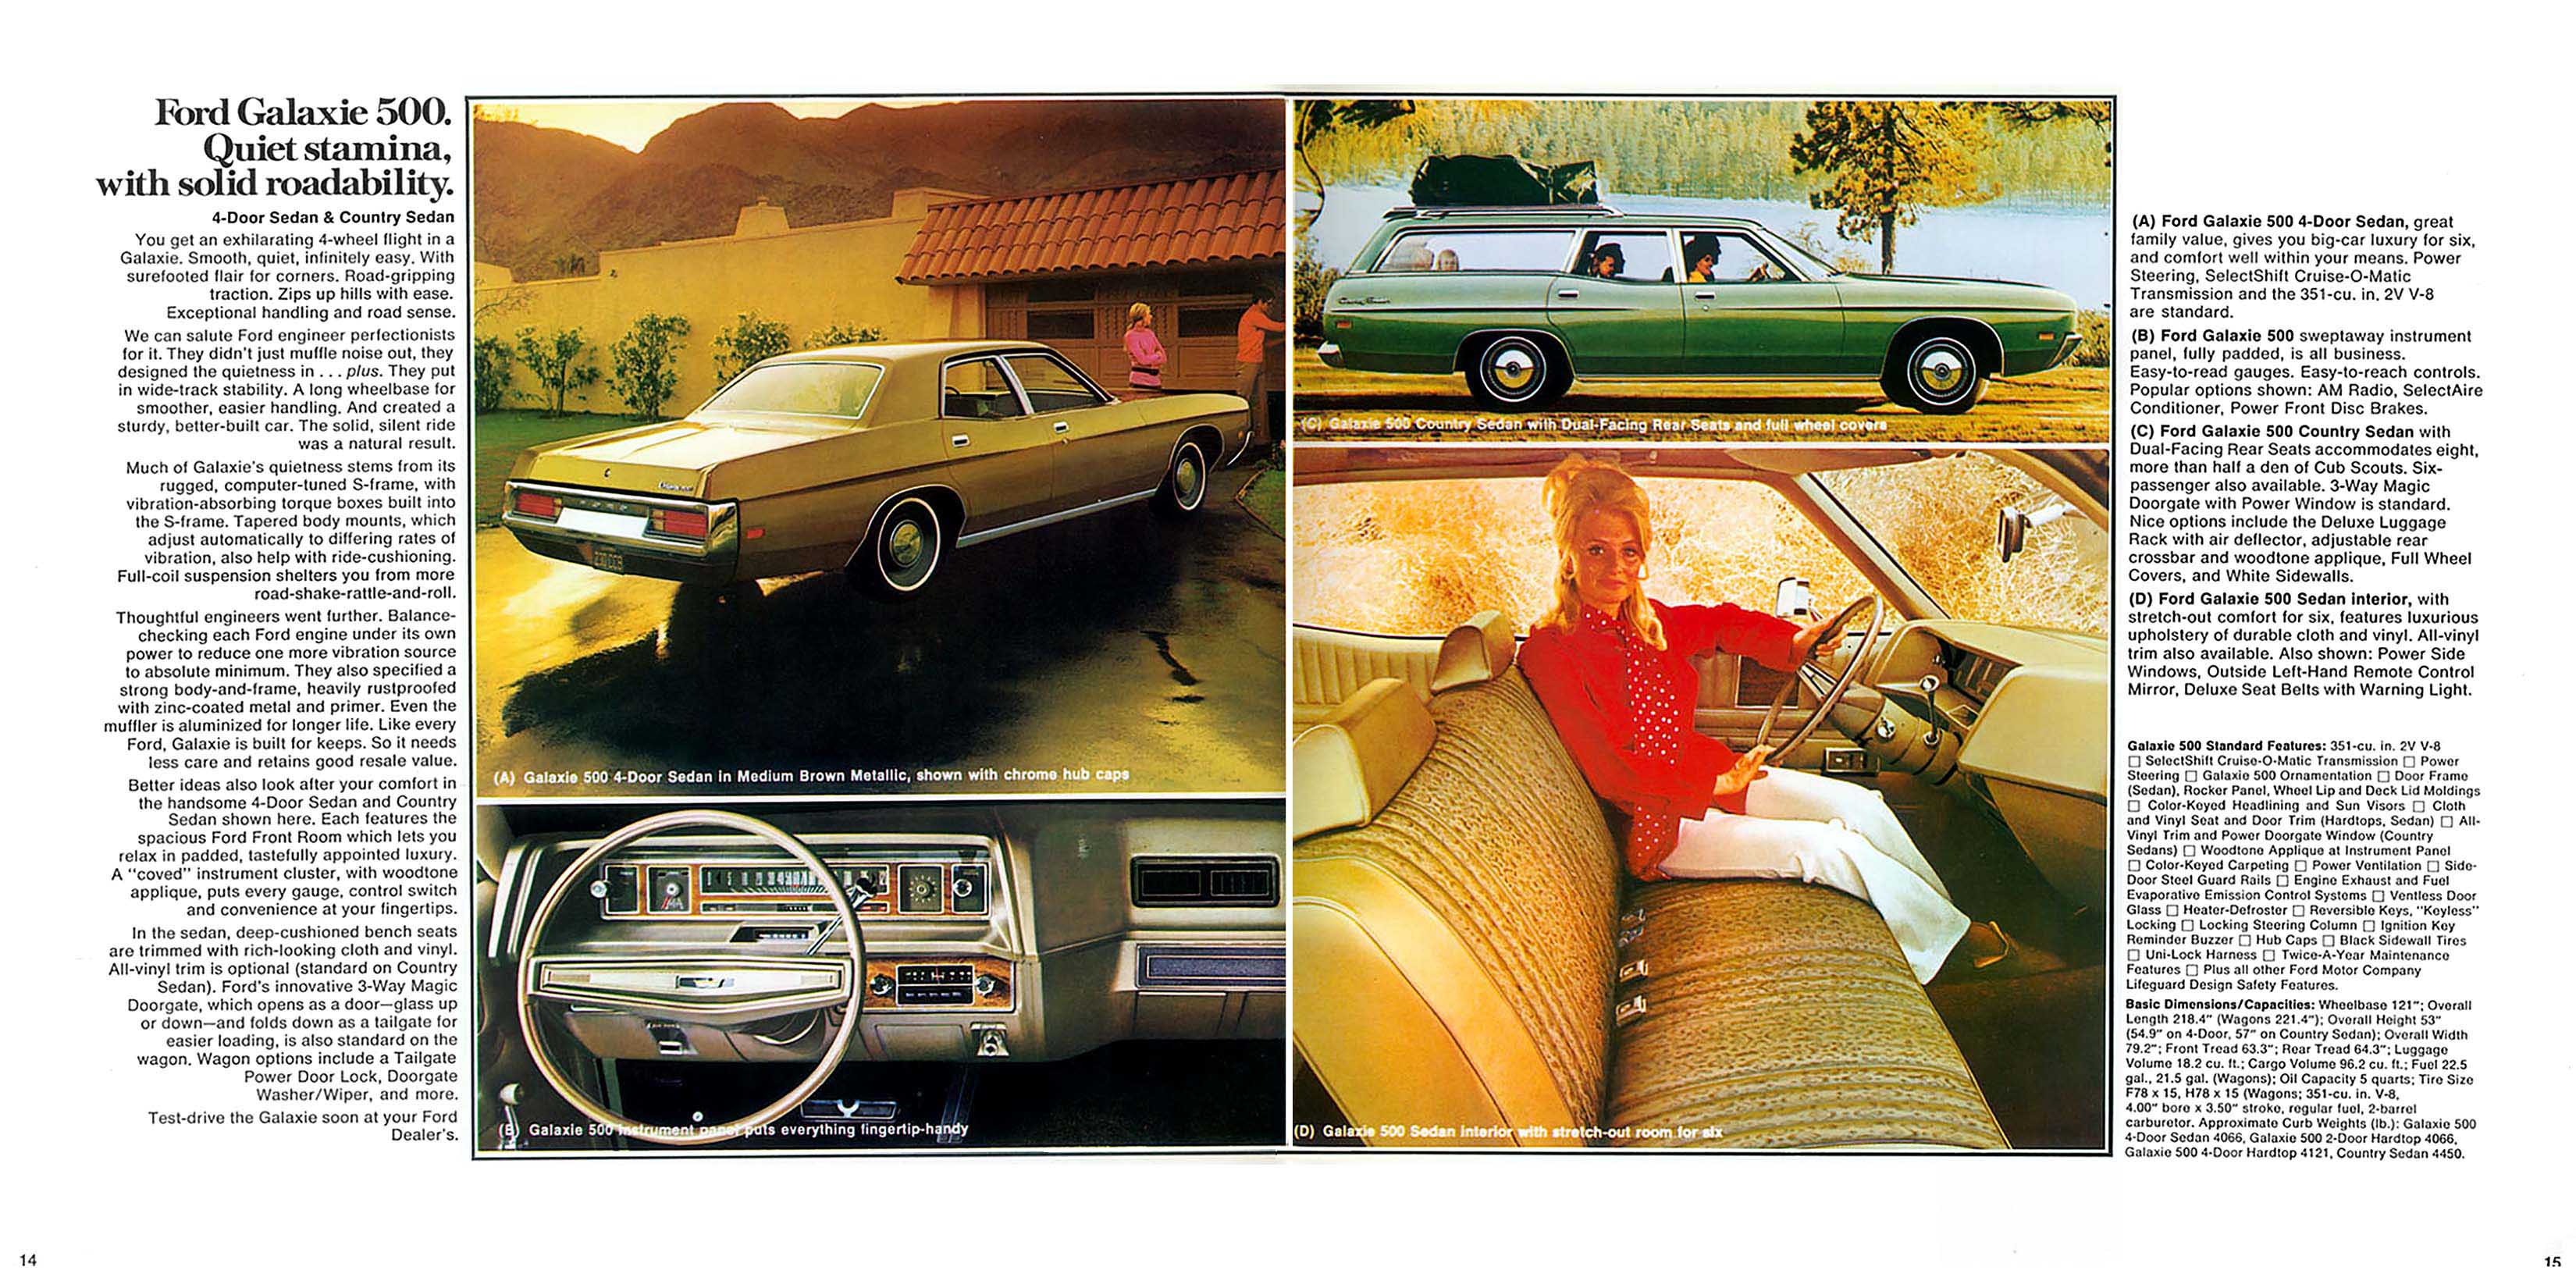 1972_Ford_Full_Size-14-15